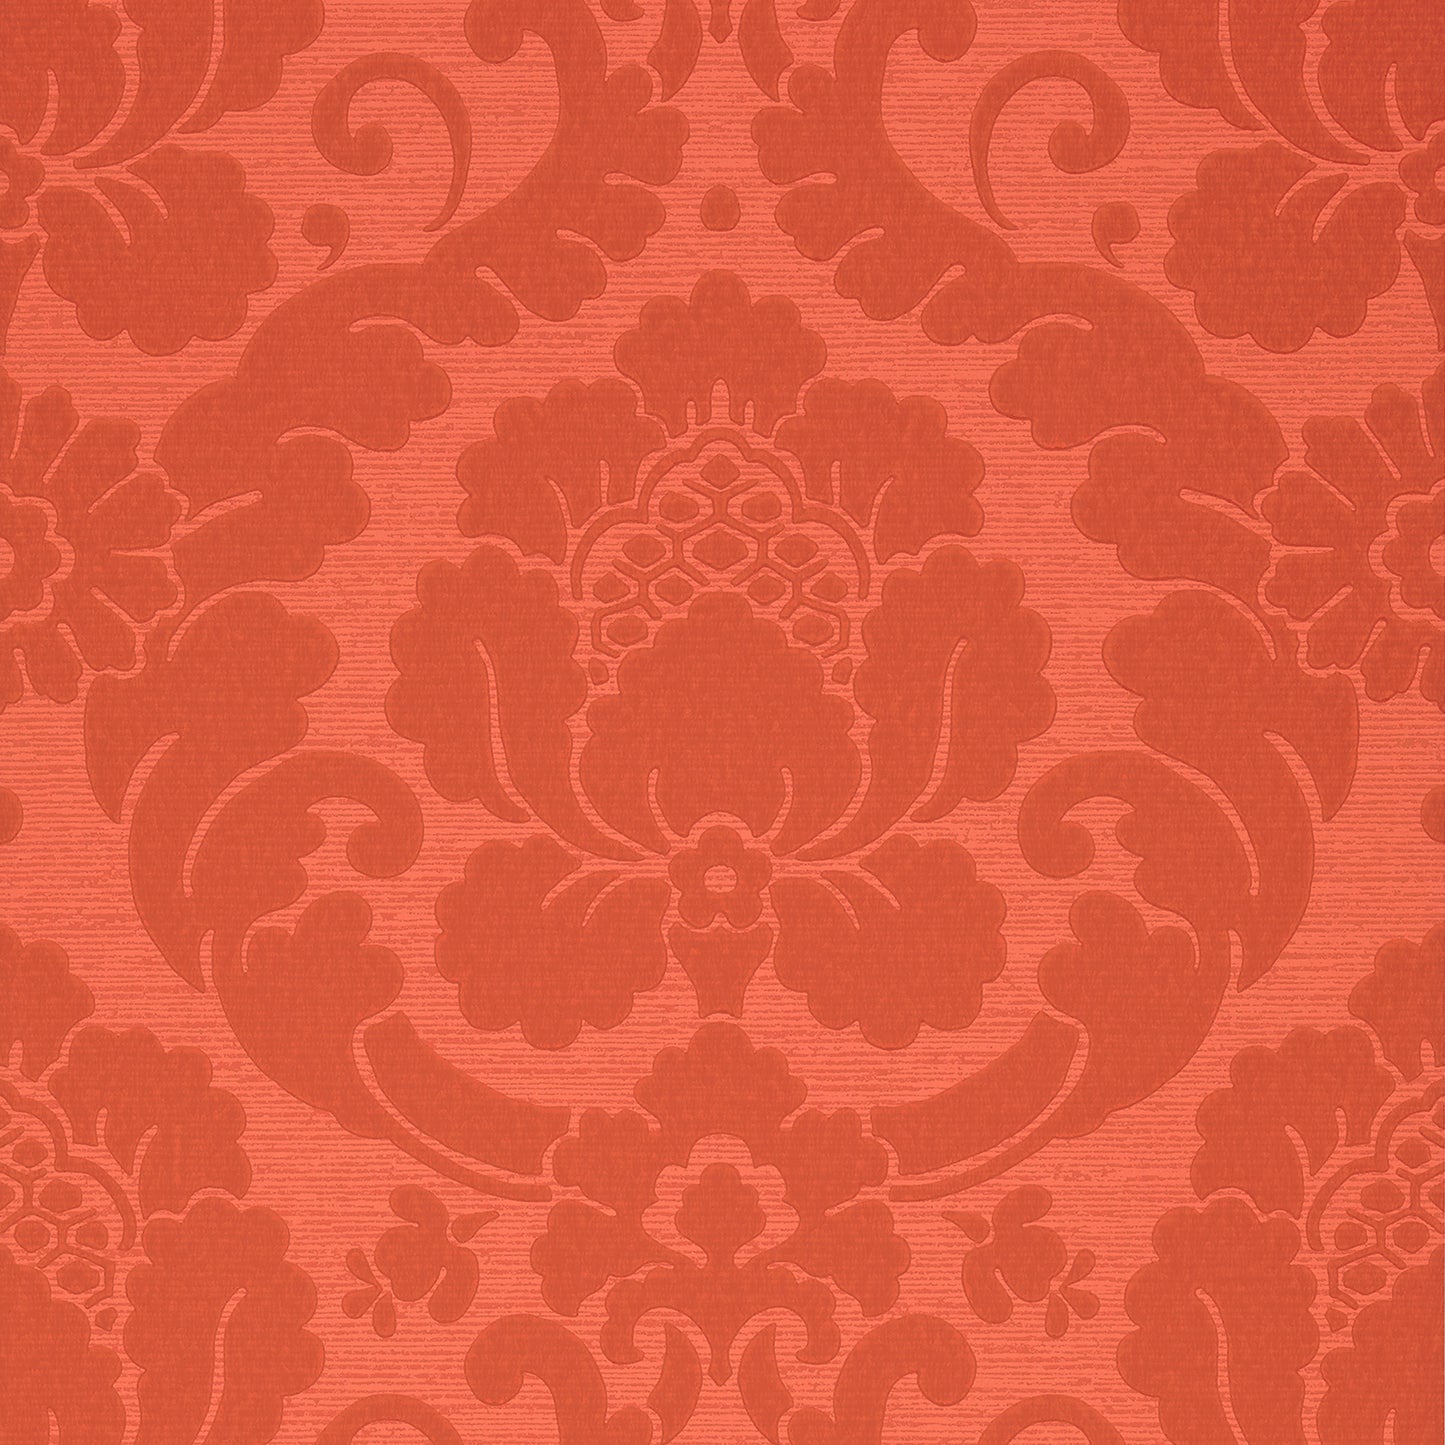 Purchase  Ann French Wallpaper Item AT6135 pattern name  Marlow